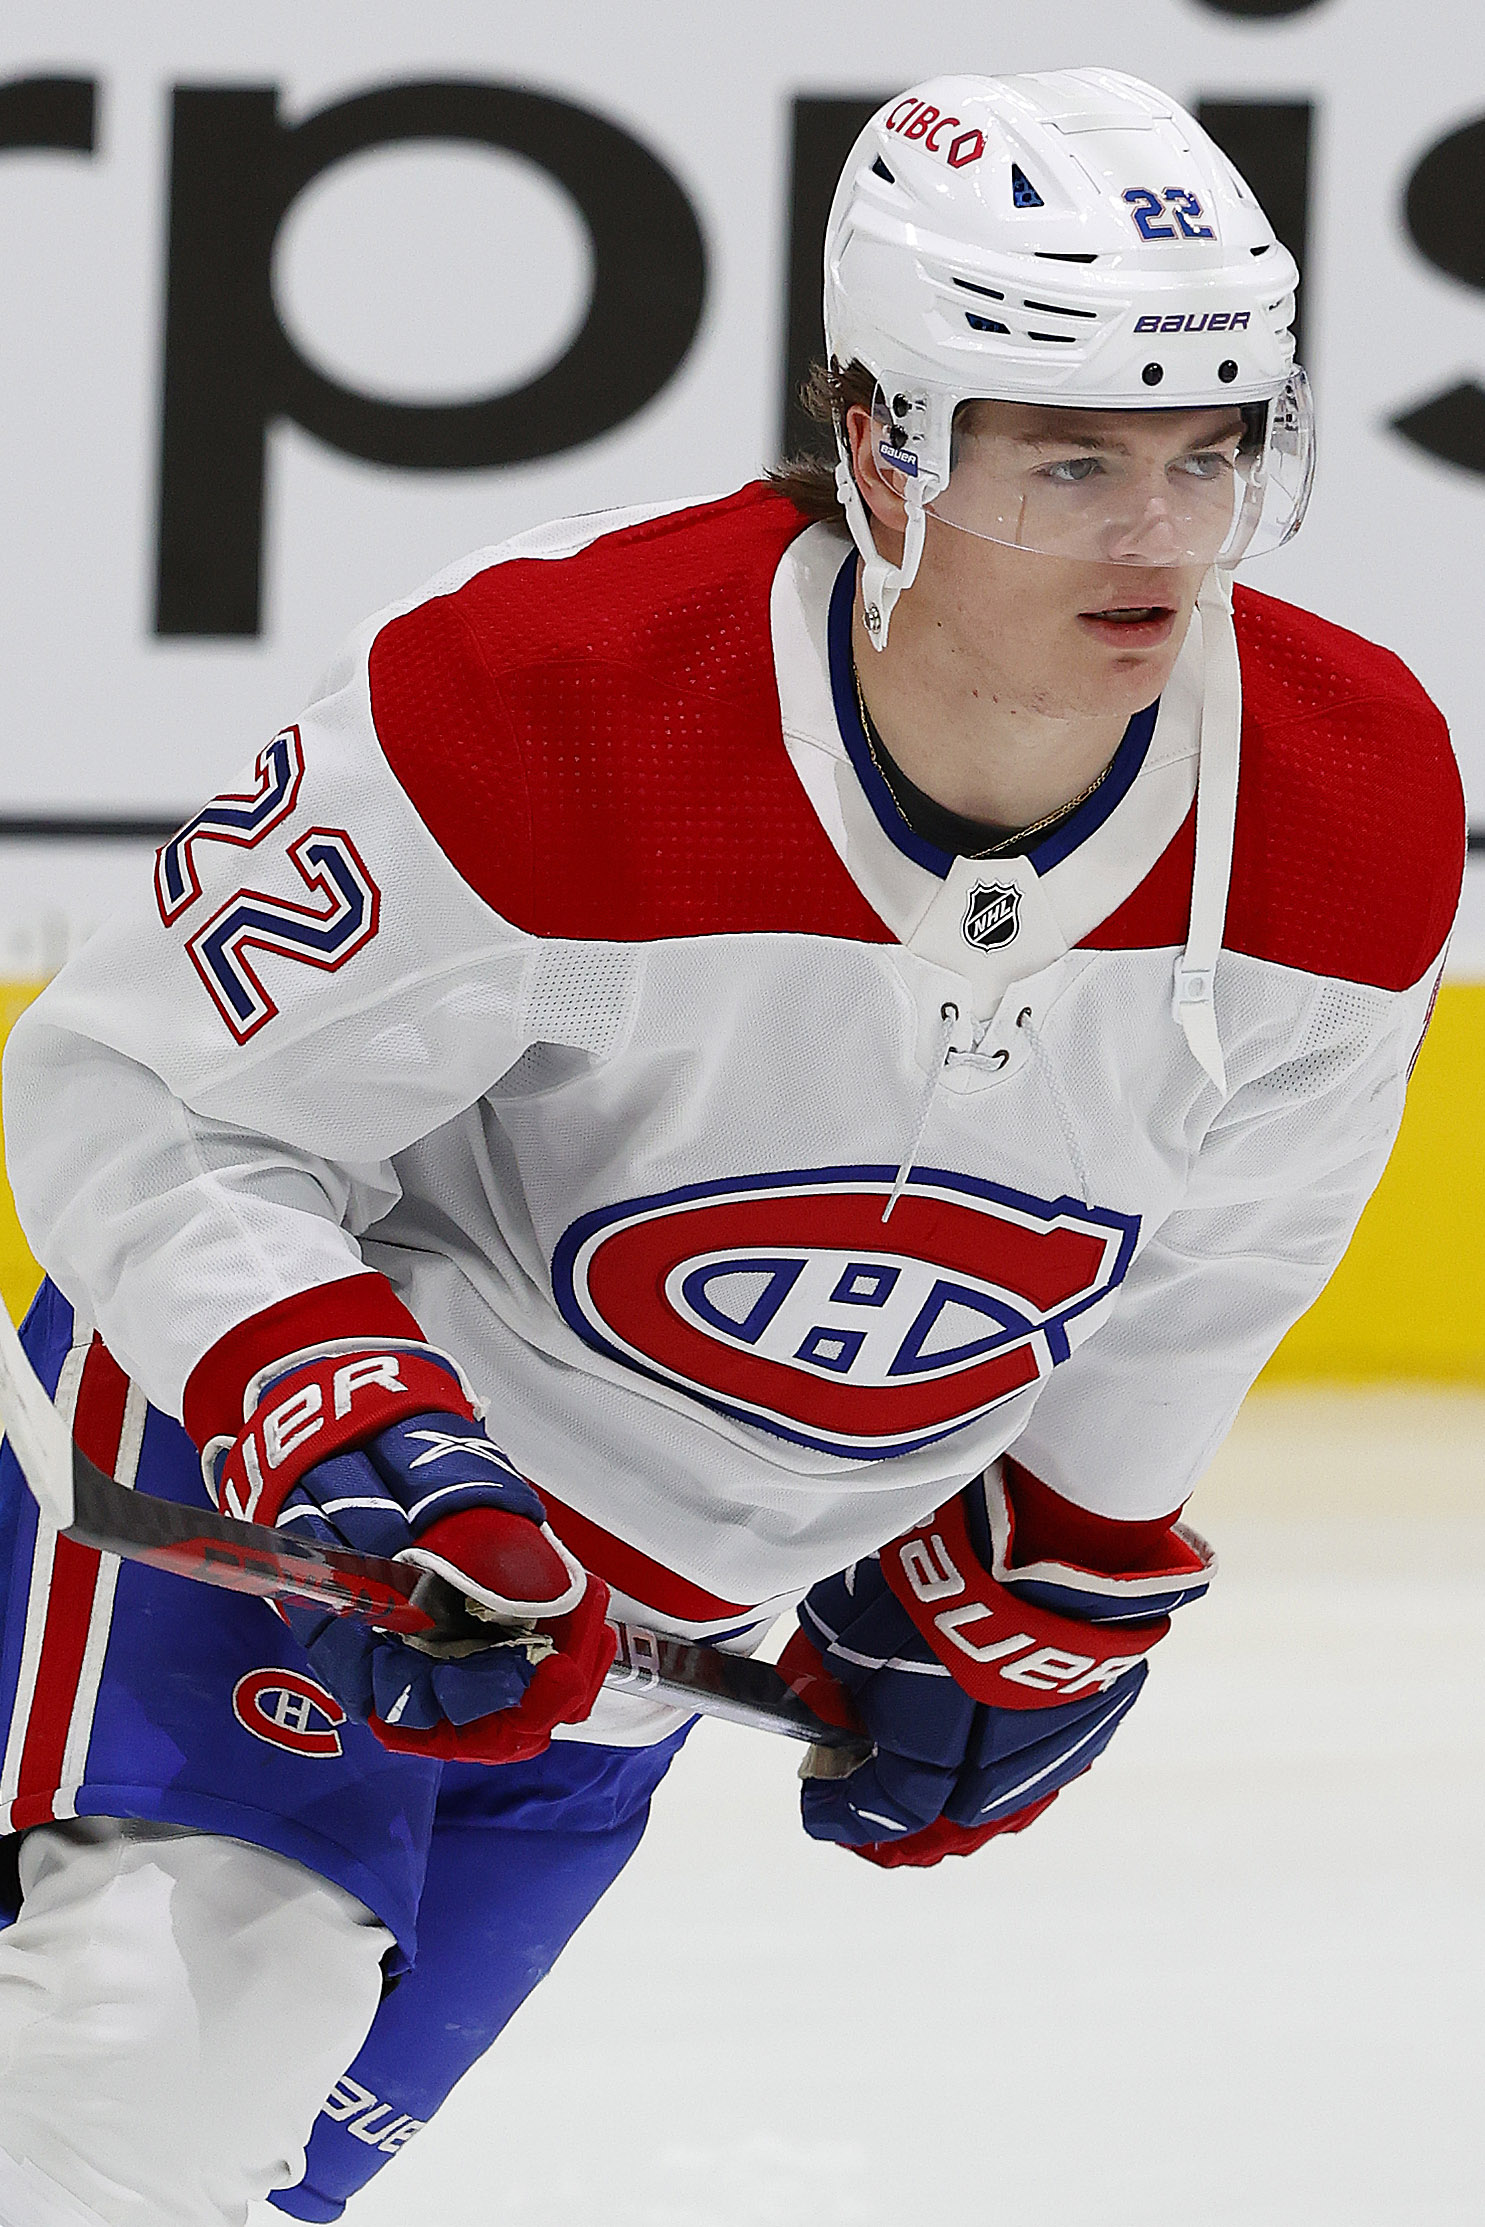 How the Canadiens' hiring of Martin St. Louis has impacted Cole Caufield